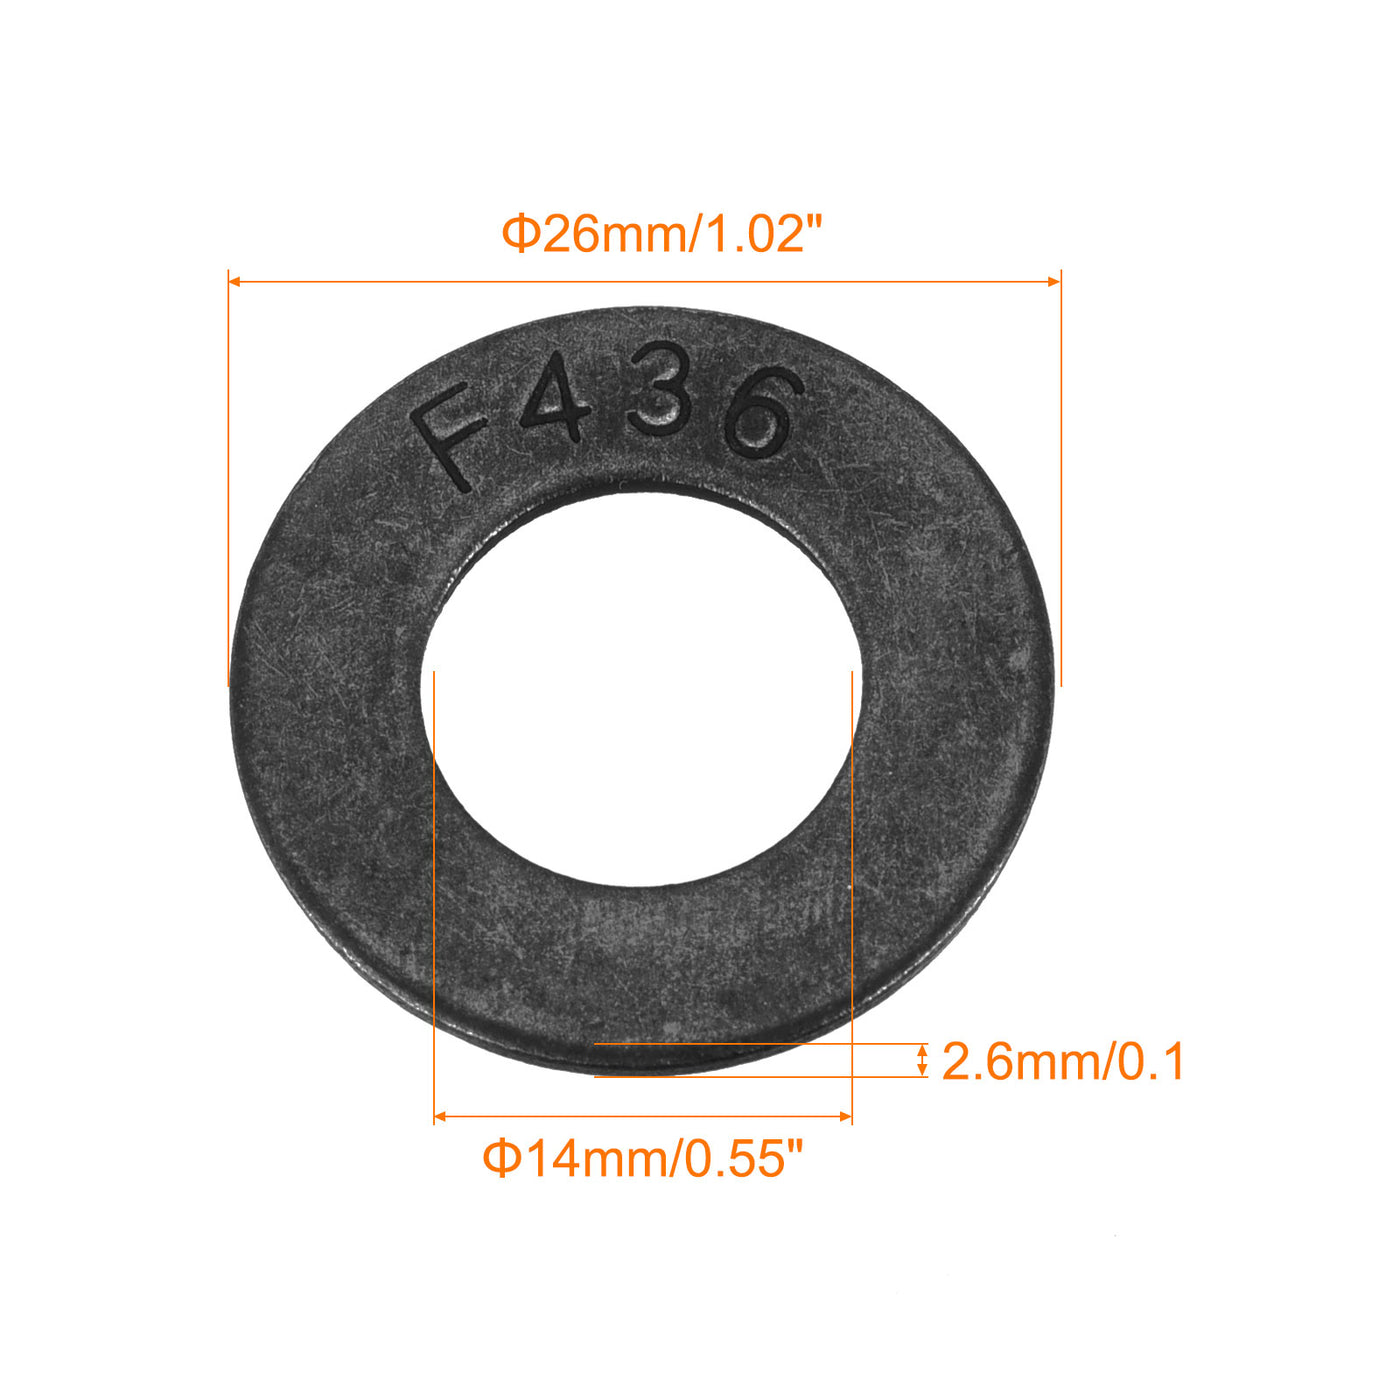 uxcell Uxcell 1/2-Inch Flat Washer, Alloy Steel Black Oxide Finish Pack of 50